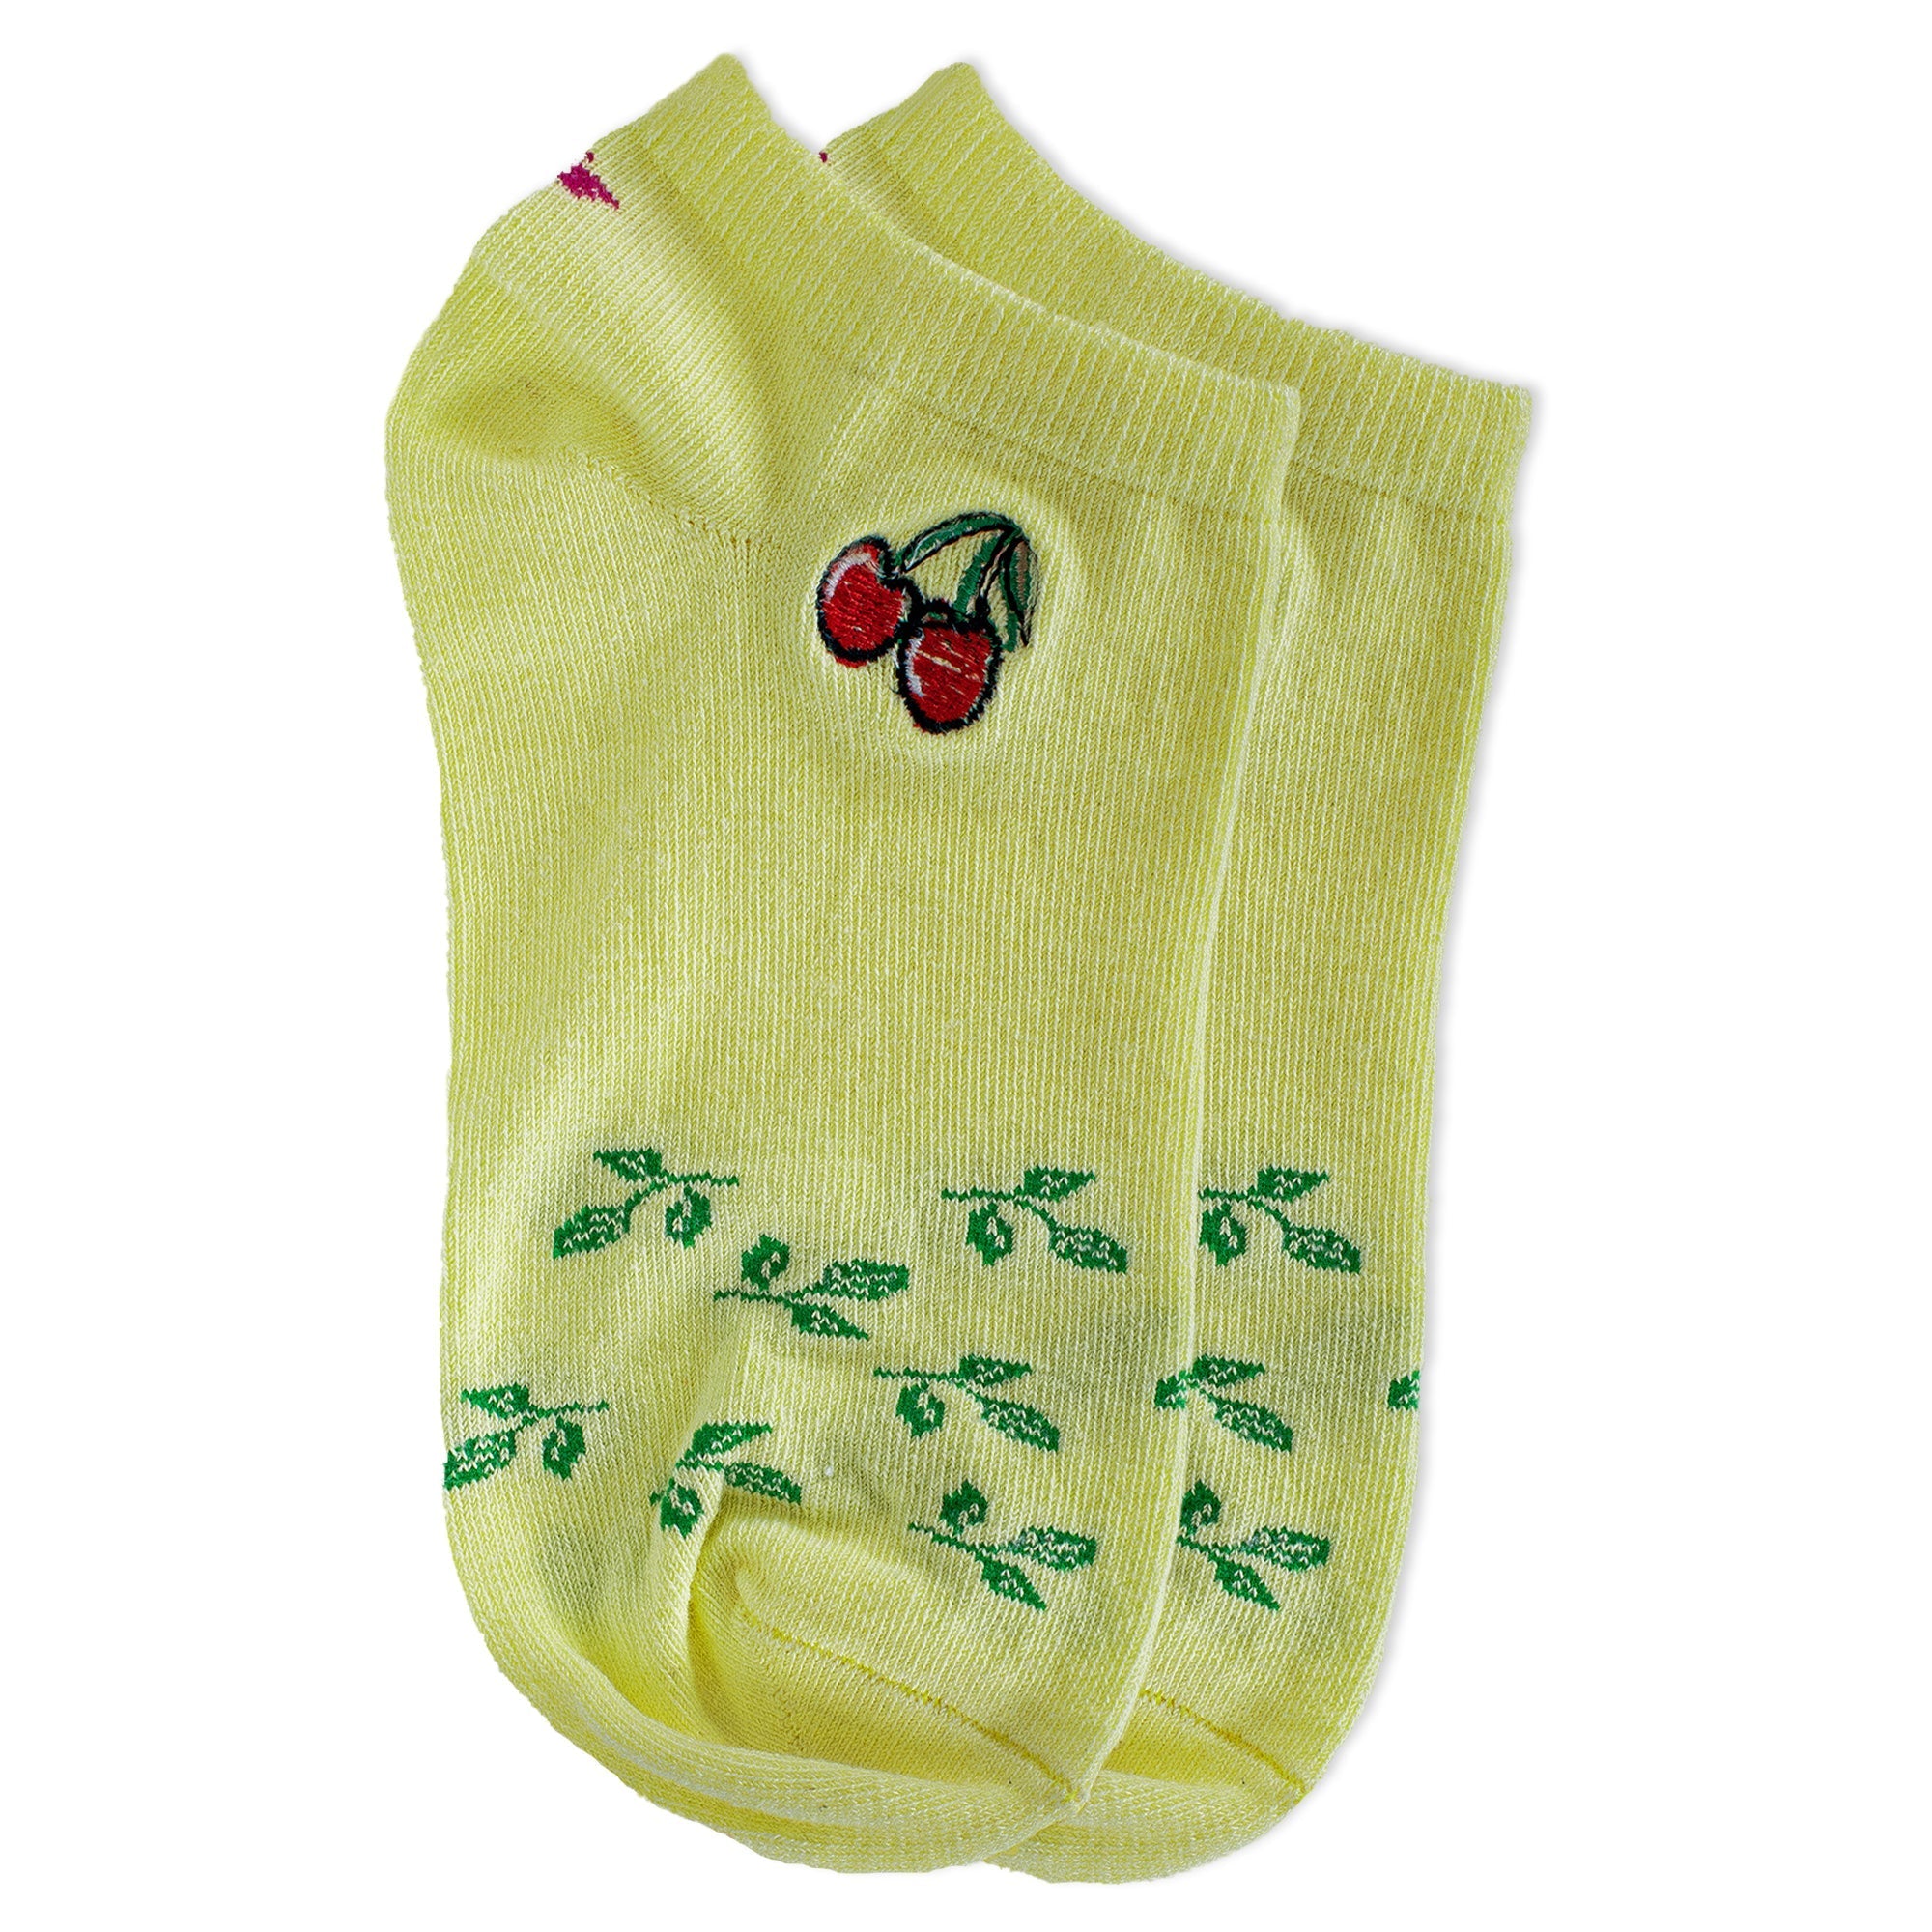 Women's Low Ankle Antibacterial Cotton socks with Embroidery Fancy- YW-W1-6003